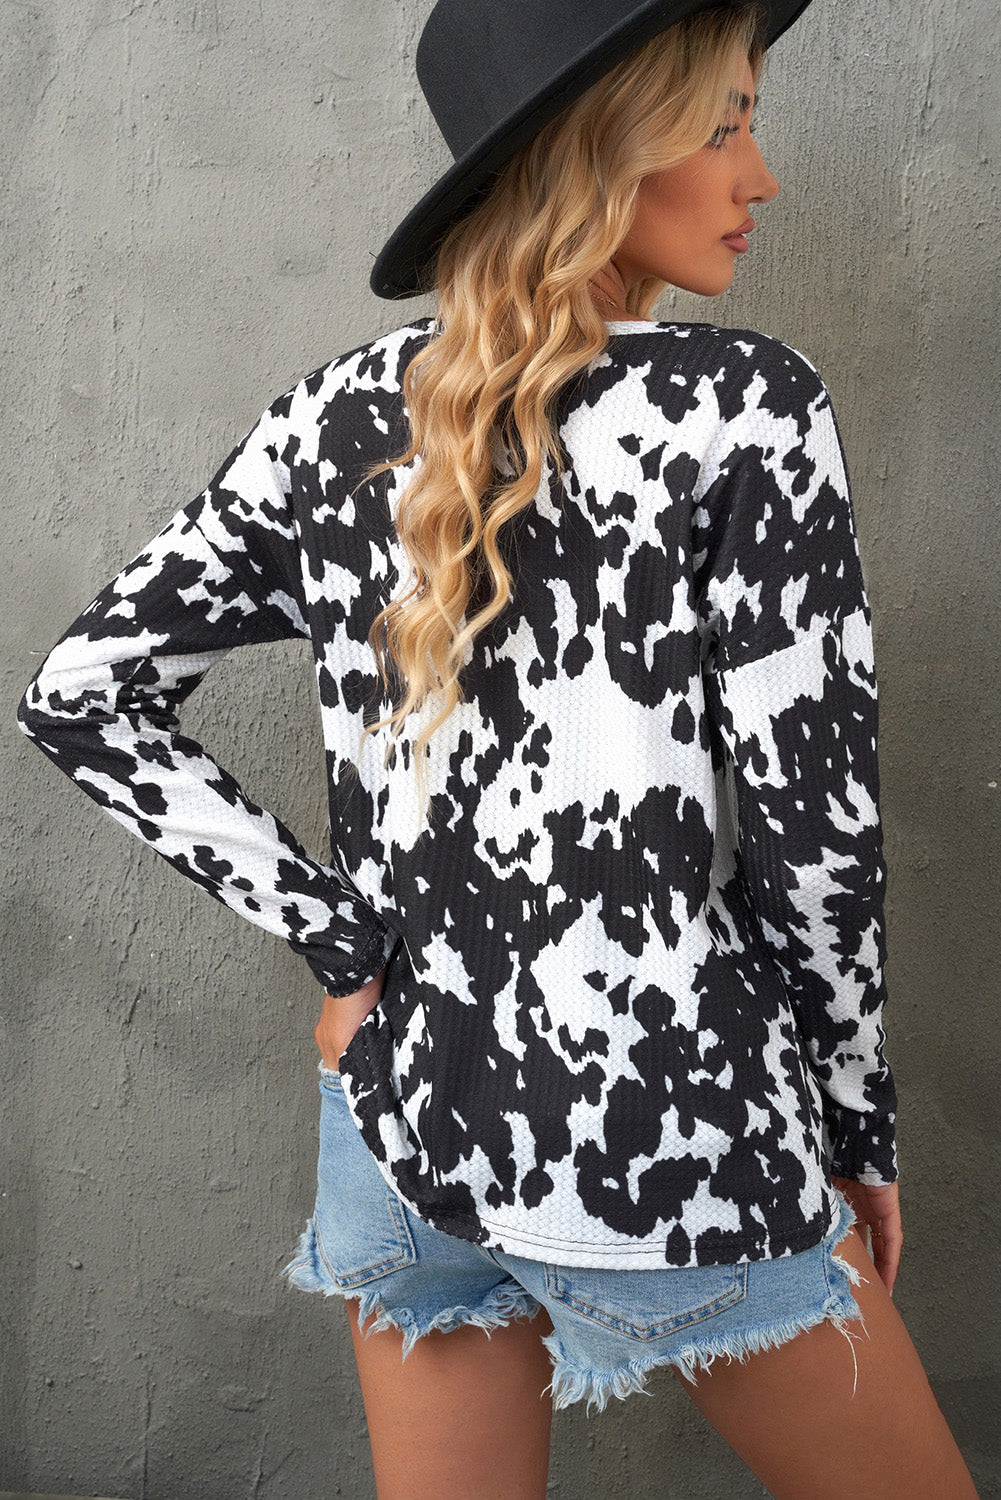 KHD Cow Print Round Neck Long Sleeve Top  Krazy Heart Designs Boutique   